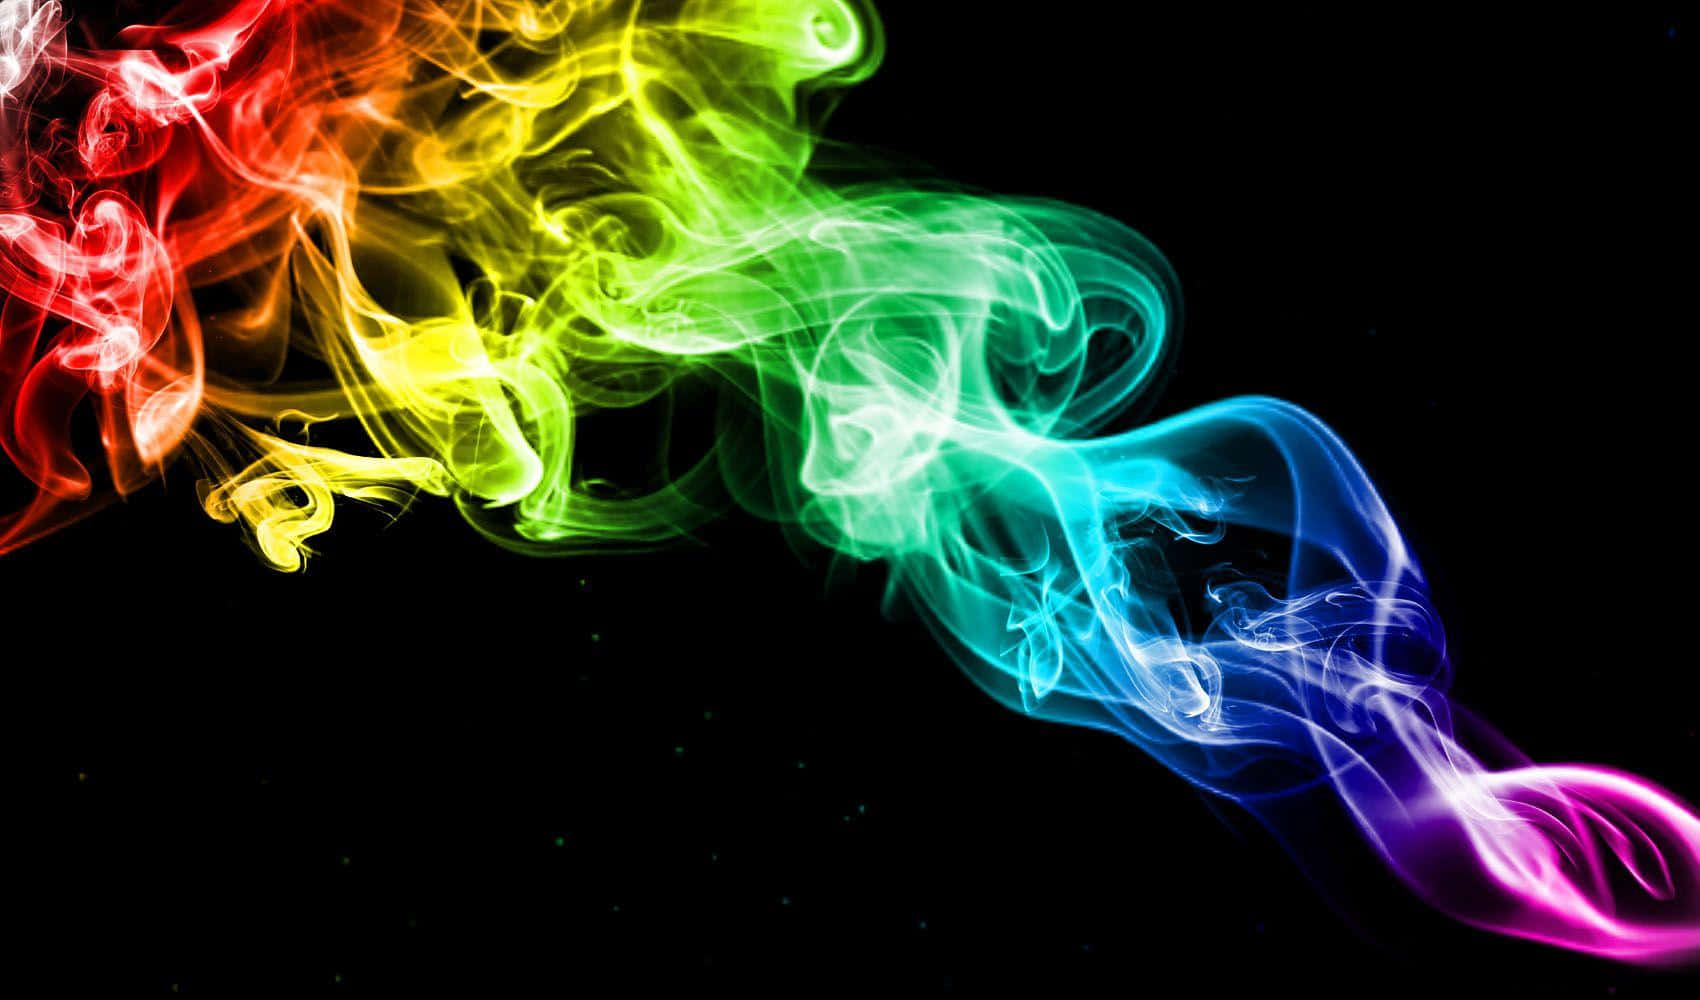 Inhale positivist with Colorful Smoke Wallpaper